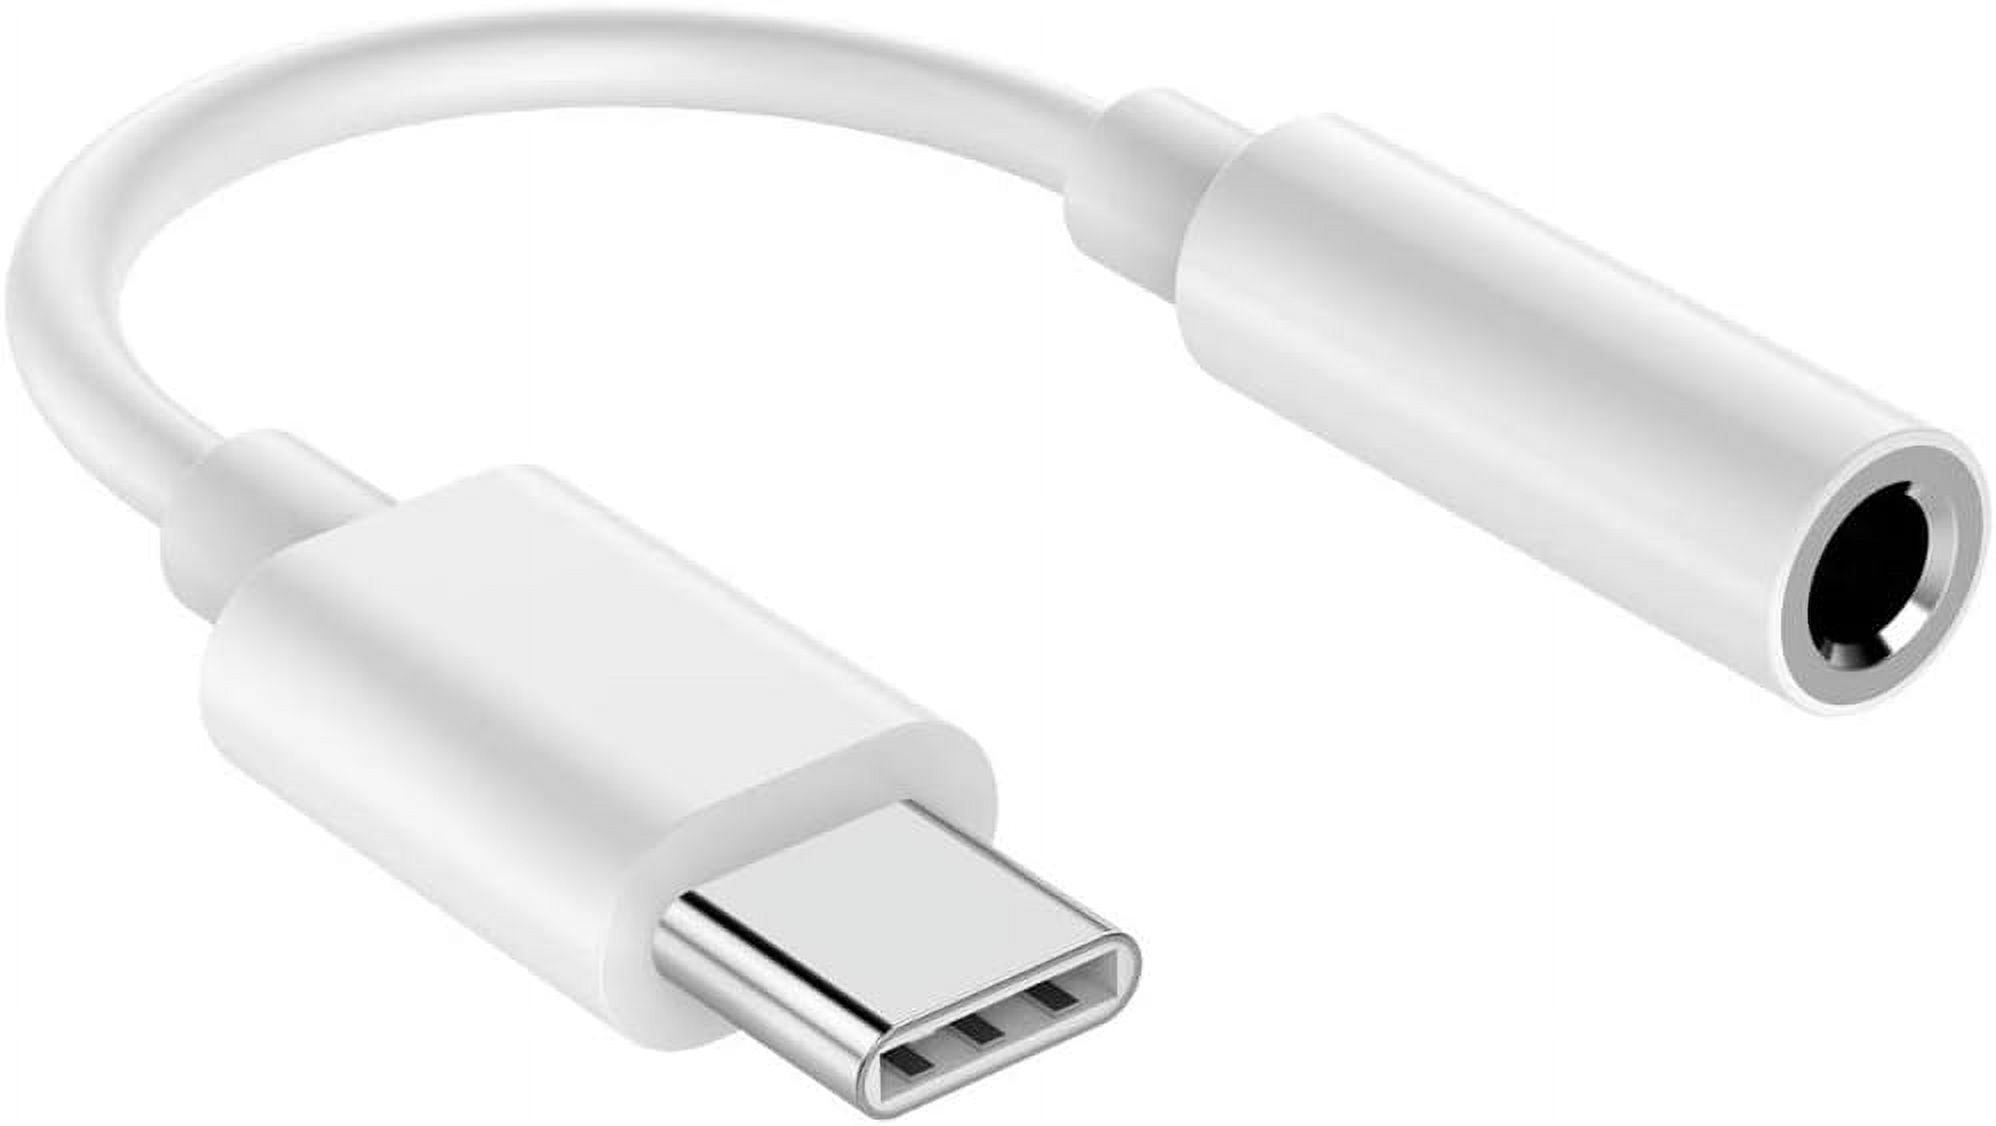 USB Type C to 3.5mm Female Headphone Jack Adapter, Aux Audio Dongle Cable  Cord Compatible with Samsung Galaxy S22 S21 S20 S10 S9 Plus/Ultra, Note 10,  iPad Pro, MacBook, Pixel (White) 